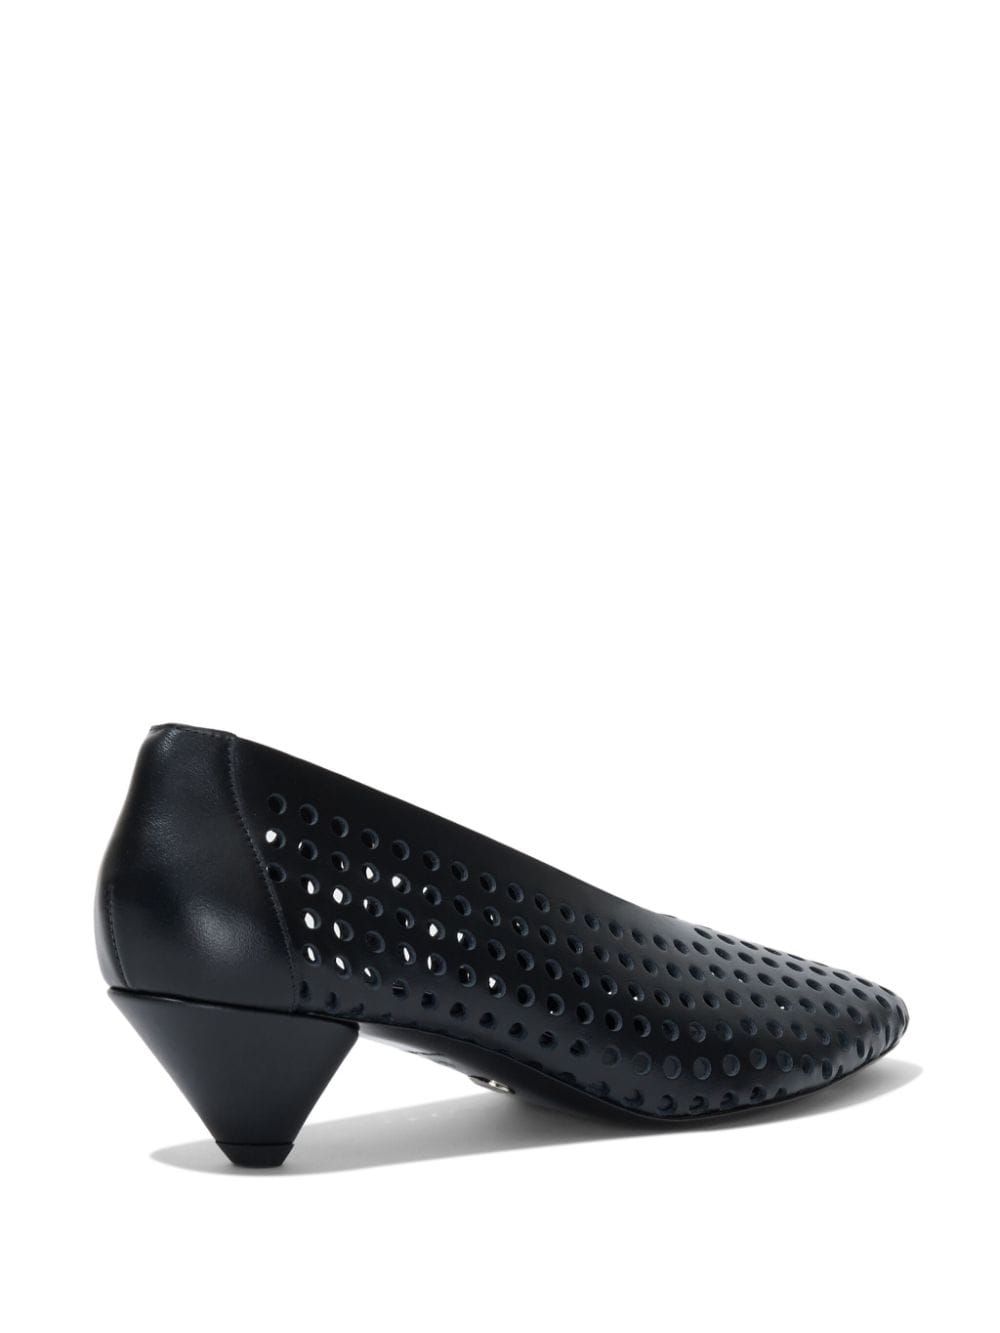 Shop Proenza Schouler Perforated Leather Pumps In Black